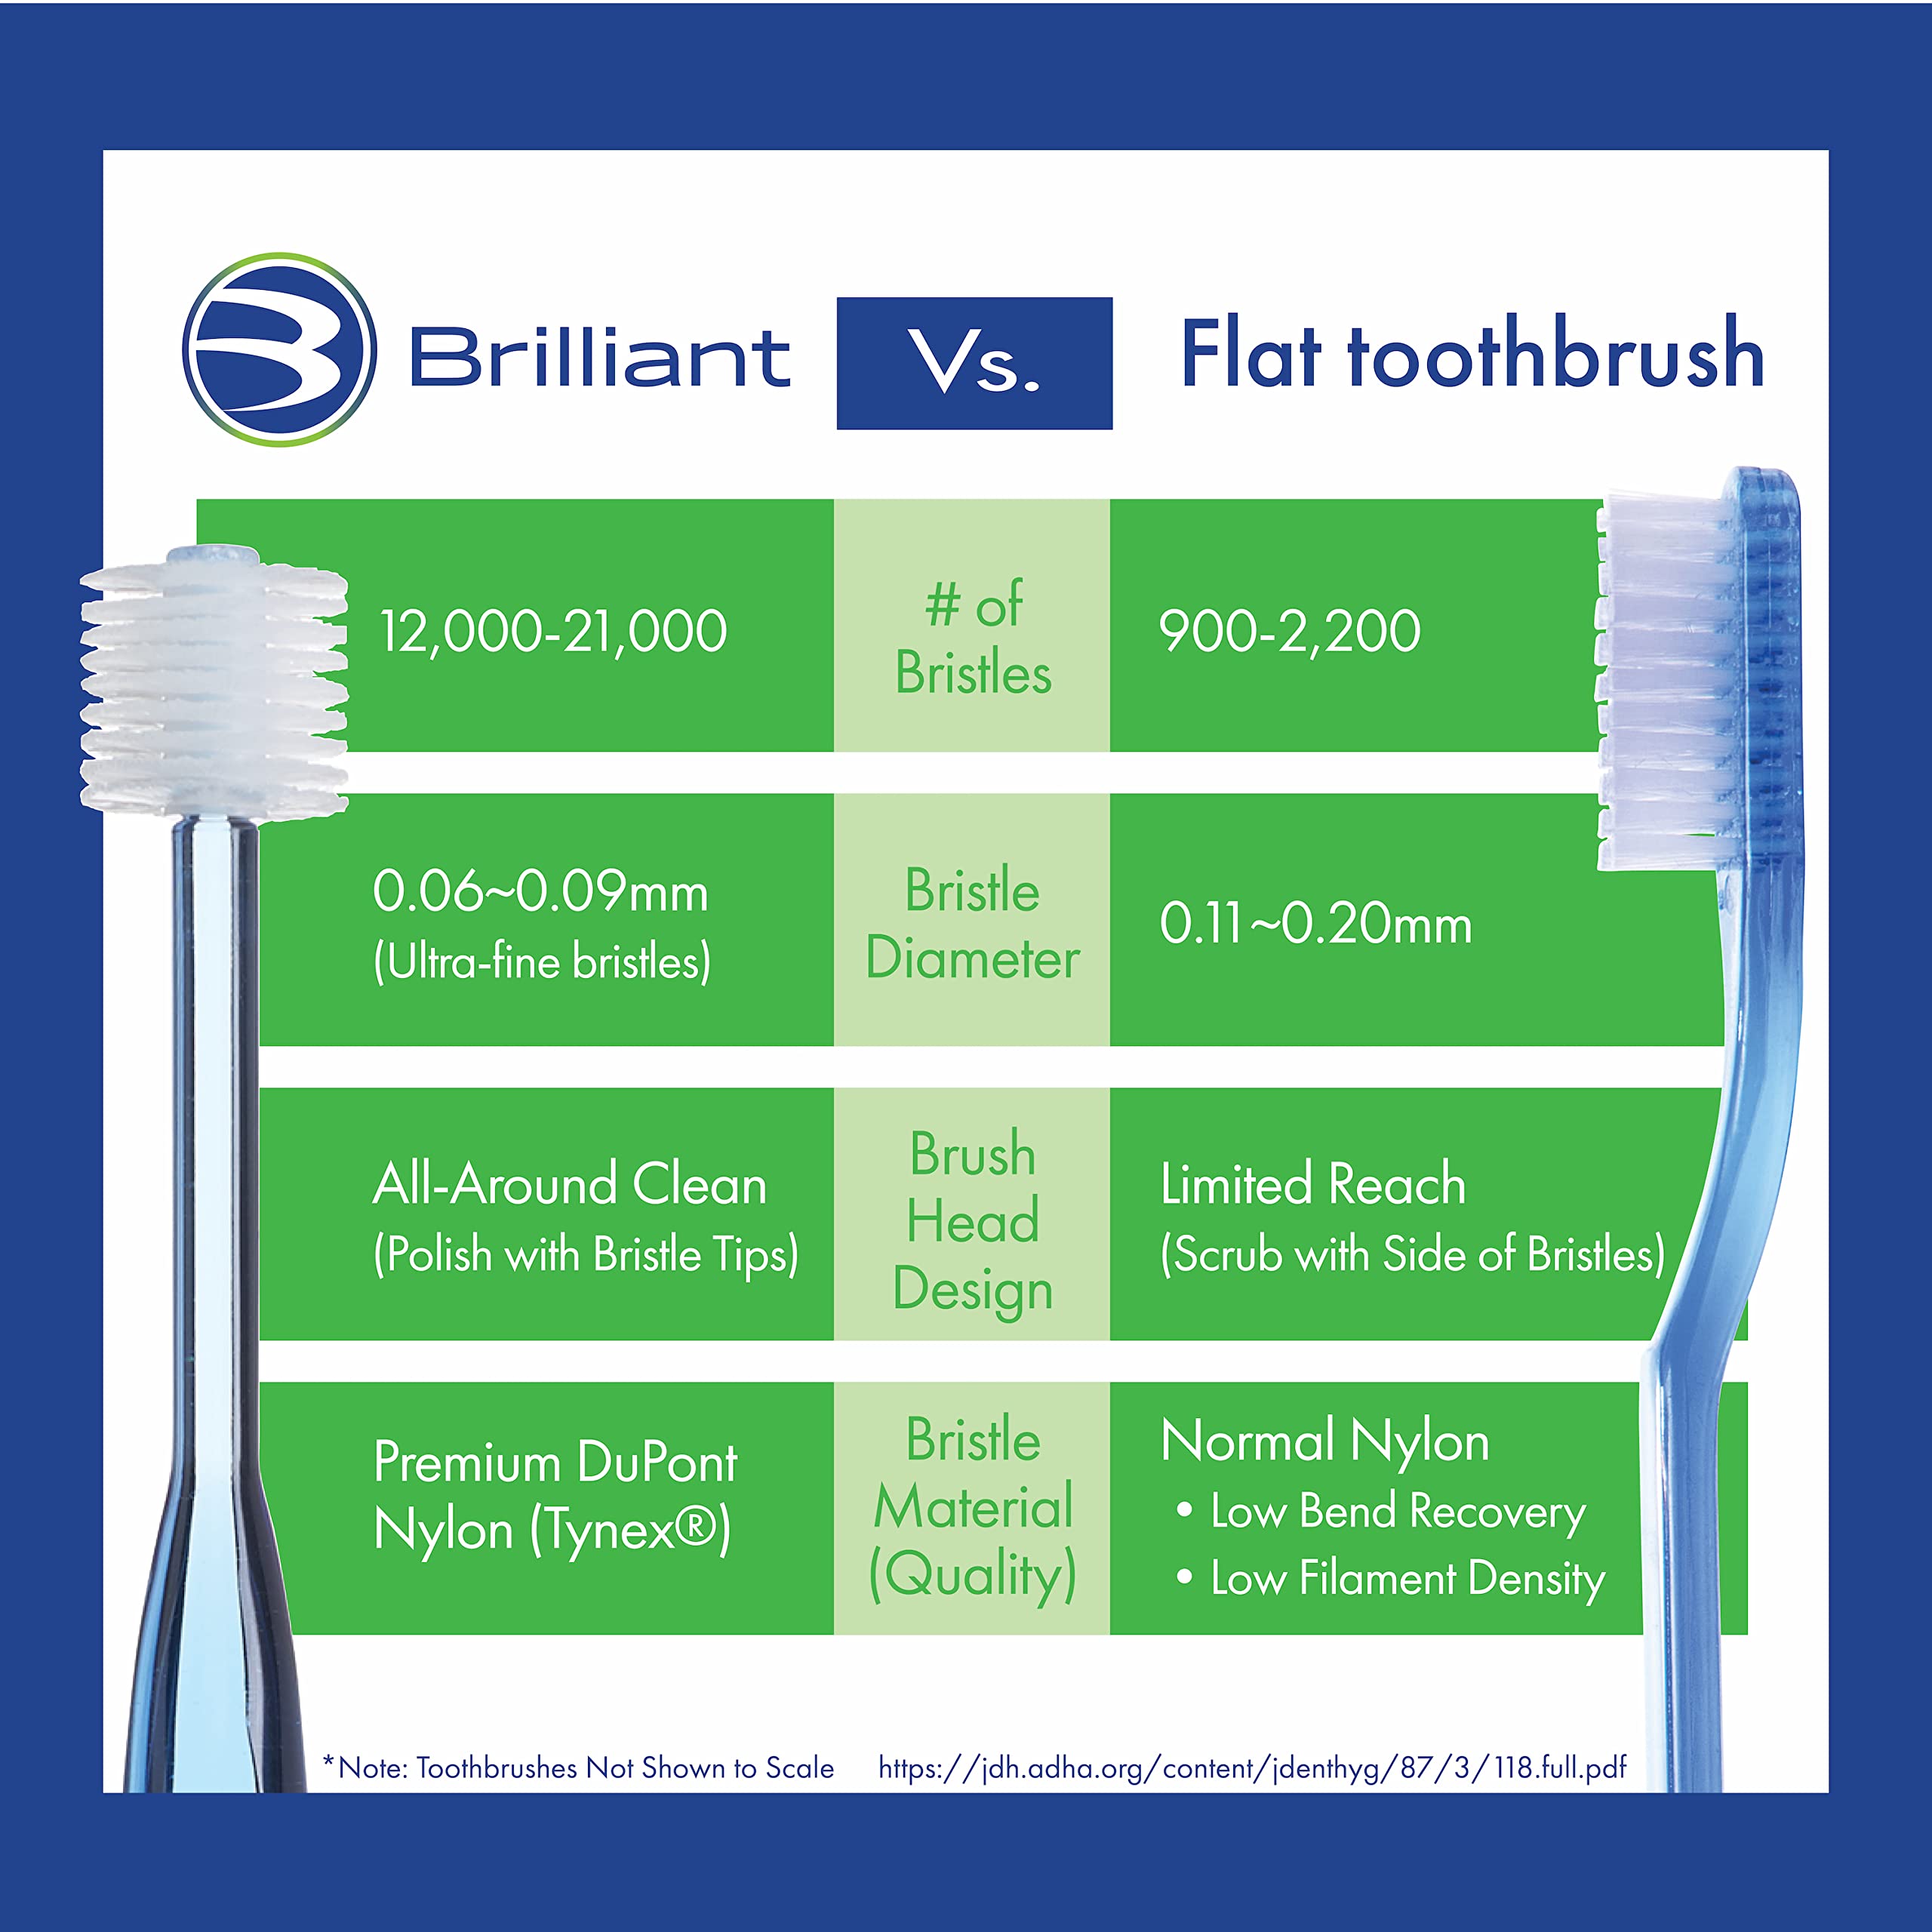 Brilliant Sensitive Toothbrush – 360 Round Head Soft Bristle Toothbrush, Oral Hygiene Products That Are Great for Diabetics, Seniors, and those with Dry Mouth and Sensitive Teeth, White, 1 Count